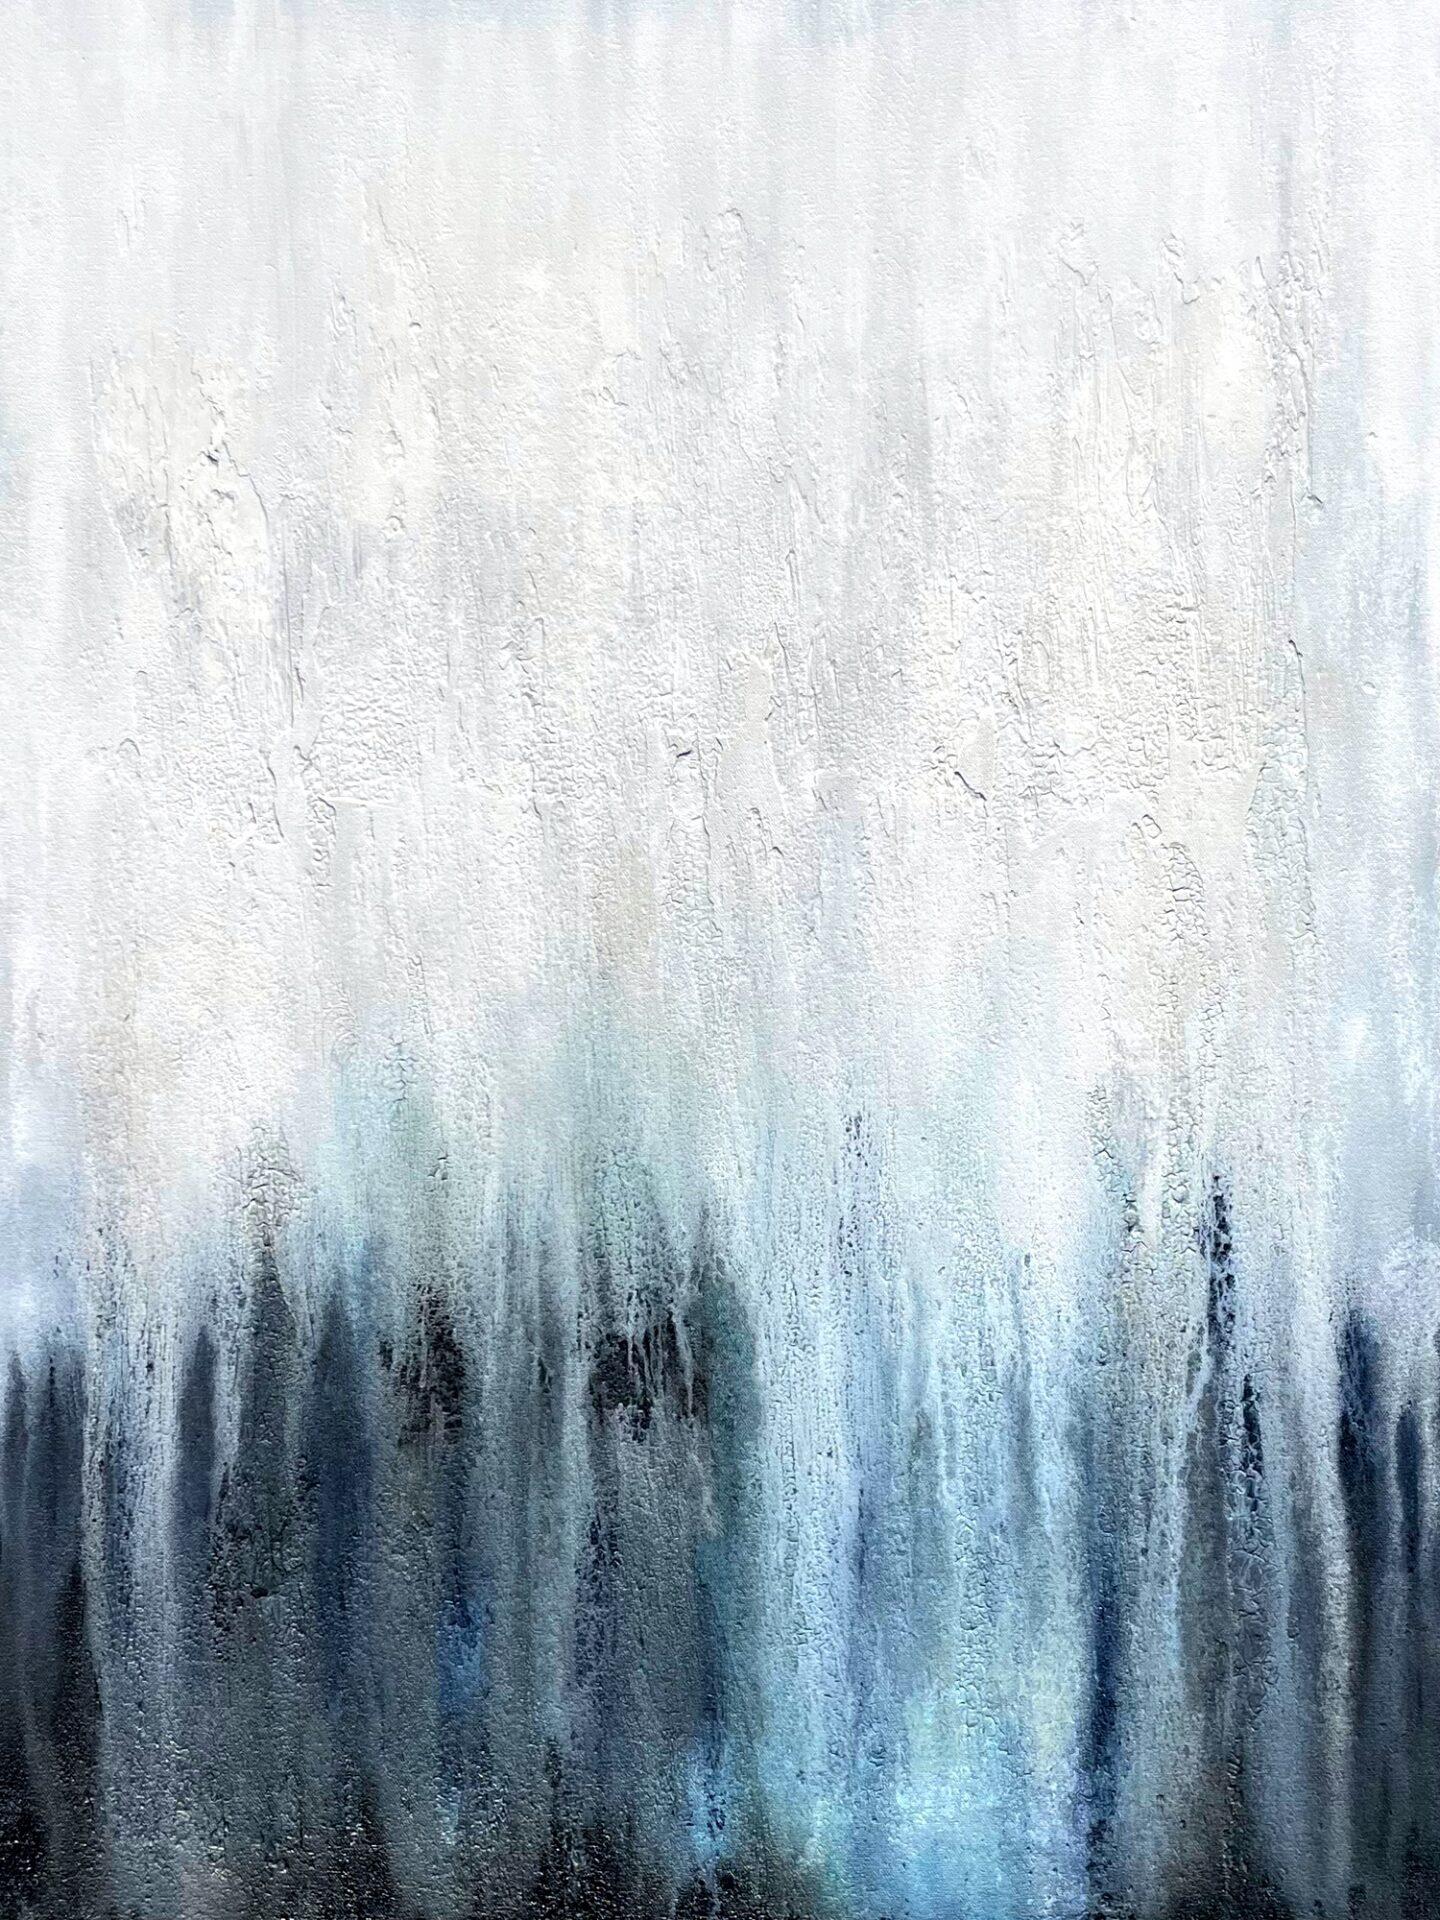 Thaw - Painting by Sandi Beange